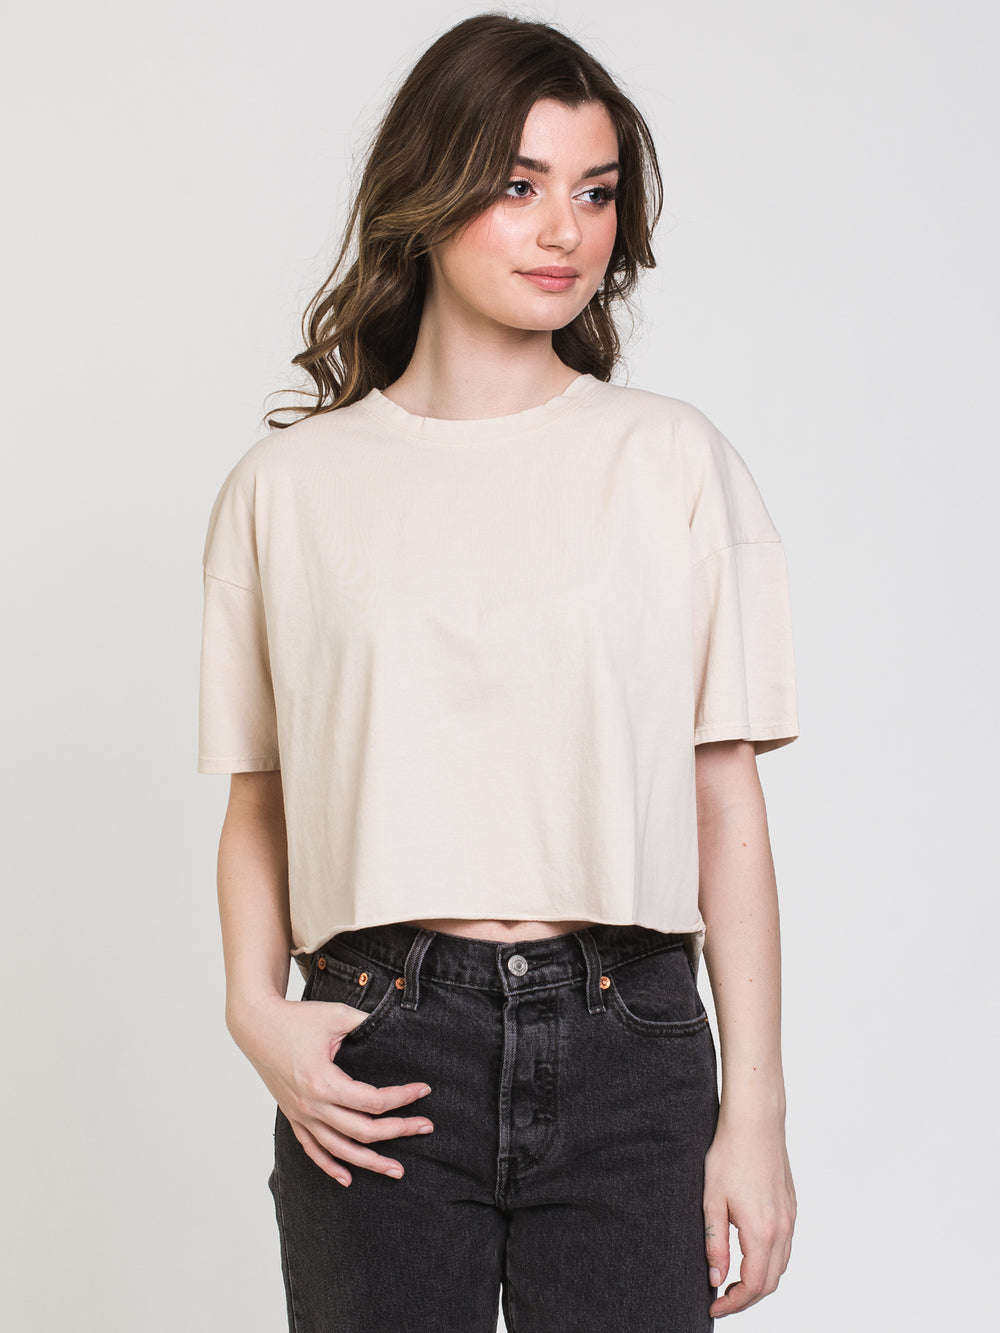 HARLOW PIPER BOXY TEE - CLEARANCE